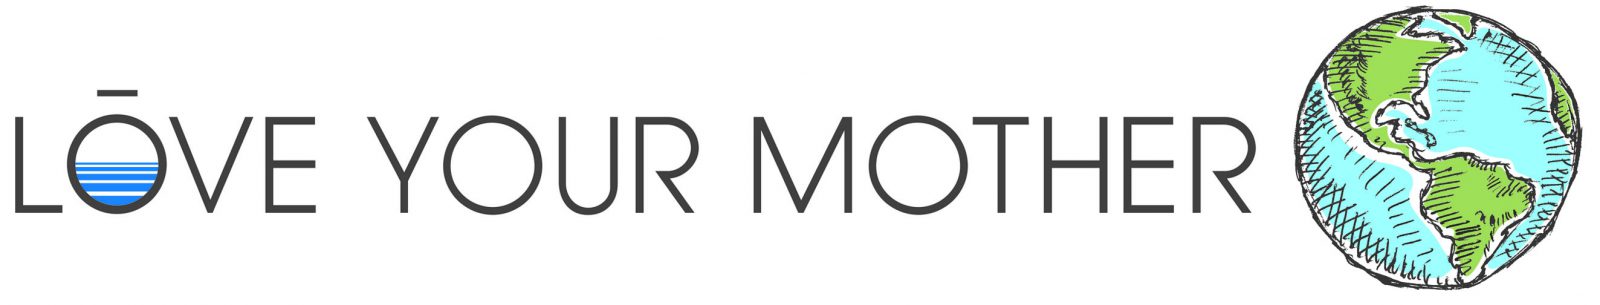 Love Your Mother banner - the solution